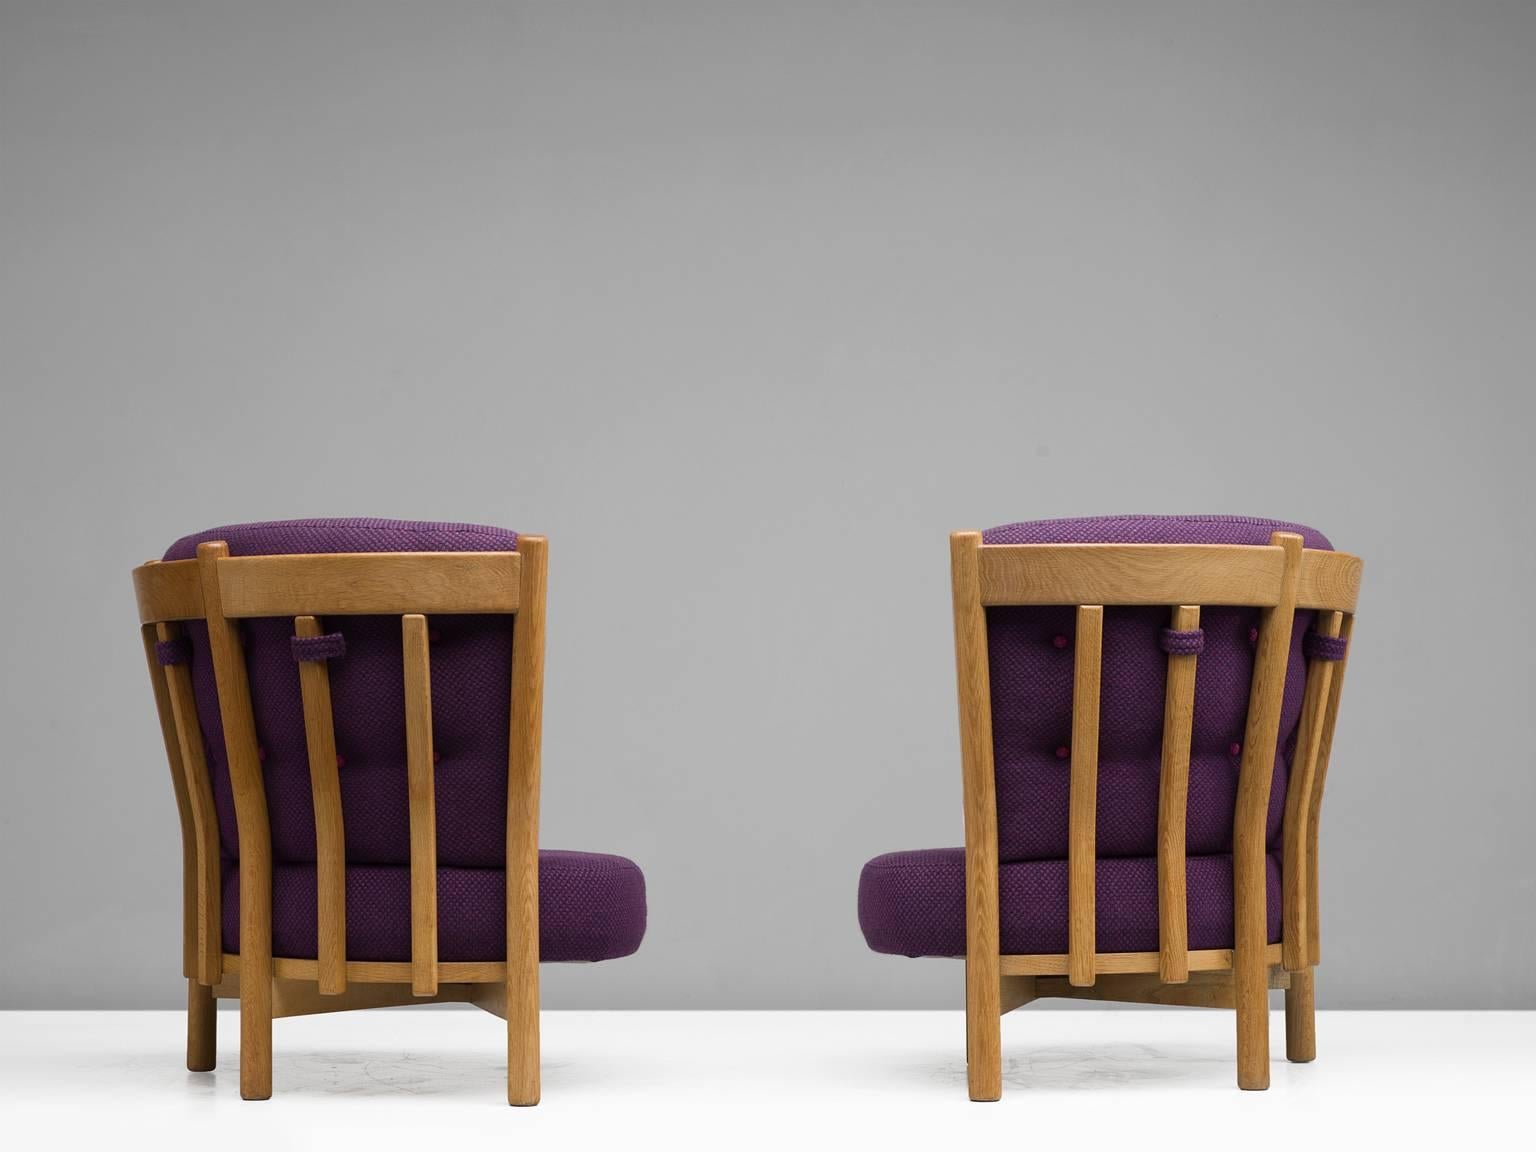 Guillerme & Chambron, easy chairs in purple fabric and oak, 1940s, France.

These distinctive chairs in beautifully patinated oak are by the French designer duo Jacques Chambron & Guillerme. These high back lounge chairs in solid oak share the